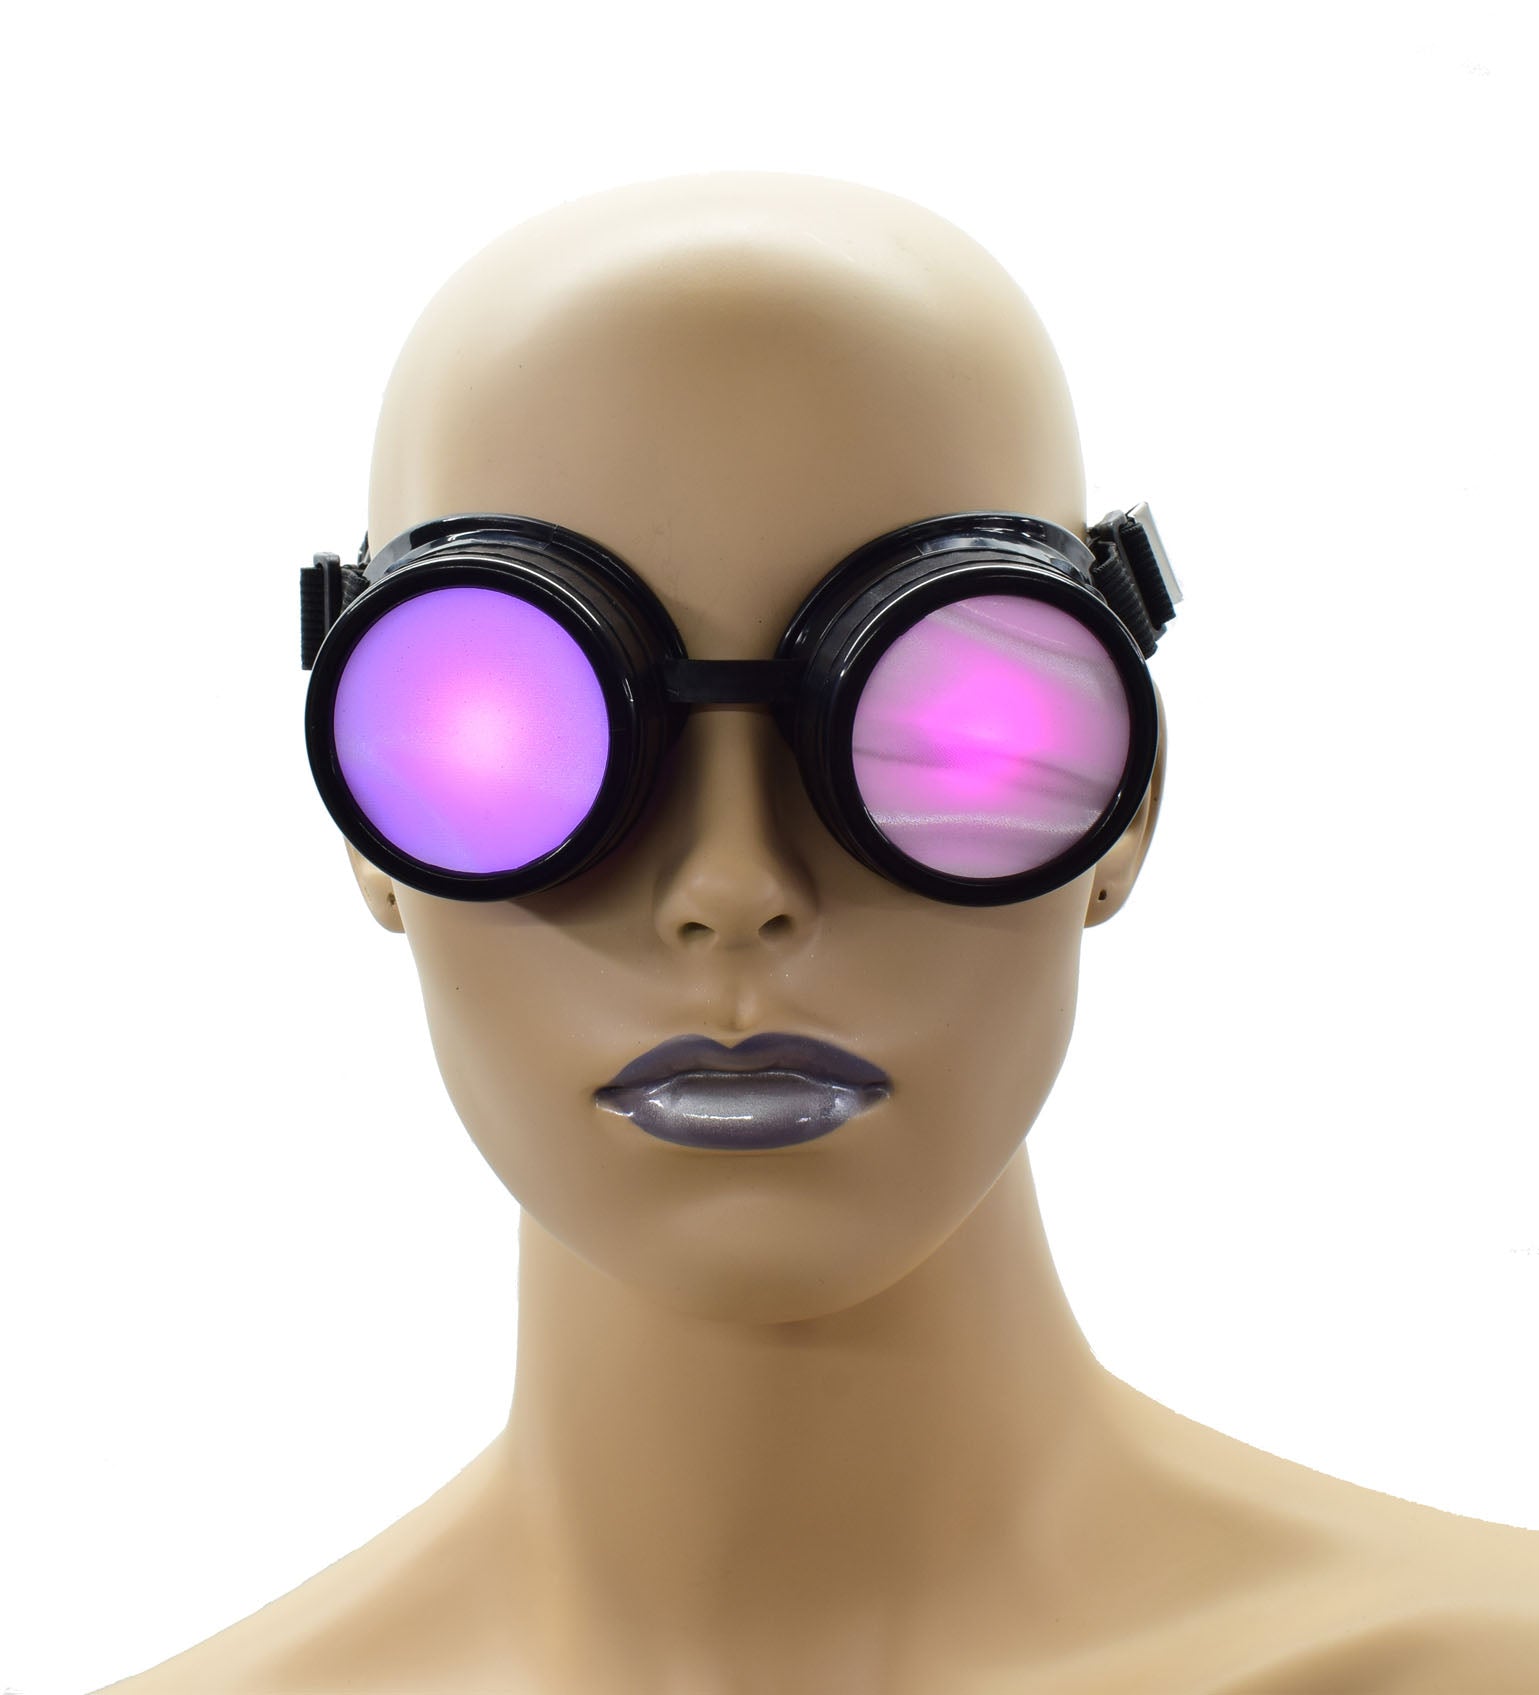 The Aurora Lights Blindfold on a mannequin head with pink lights showing through the goggles, front view.